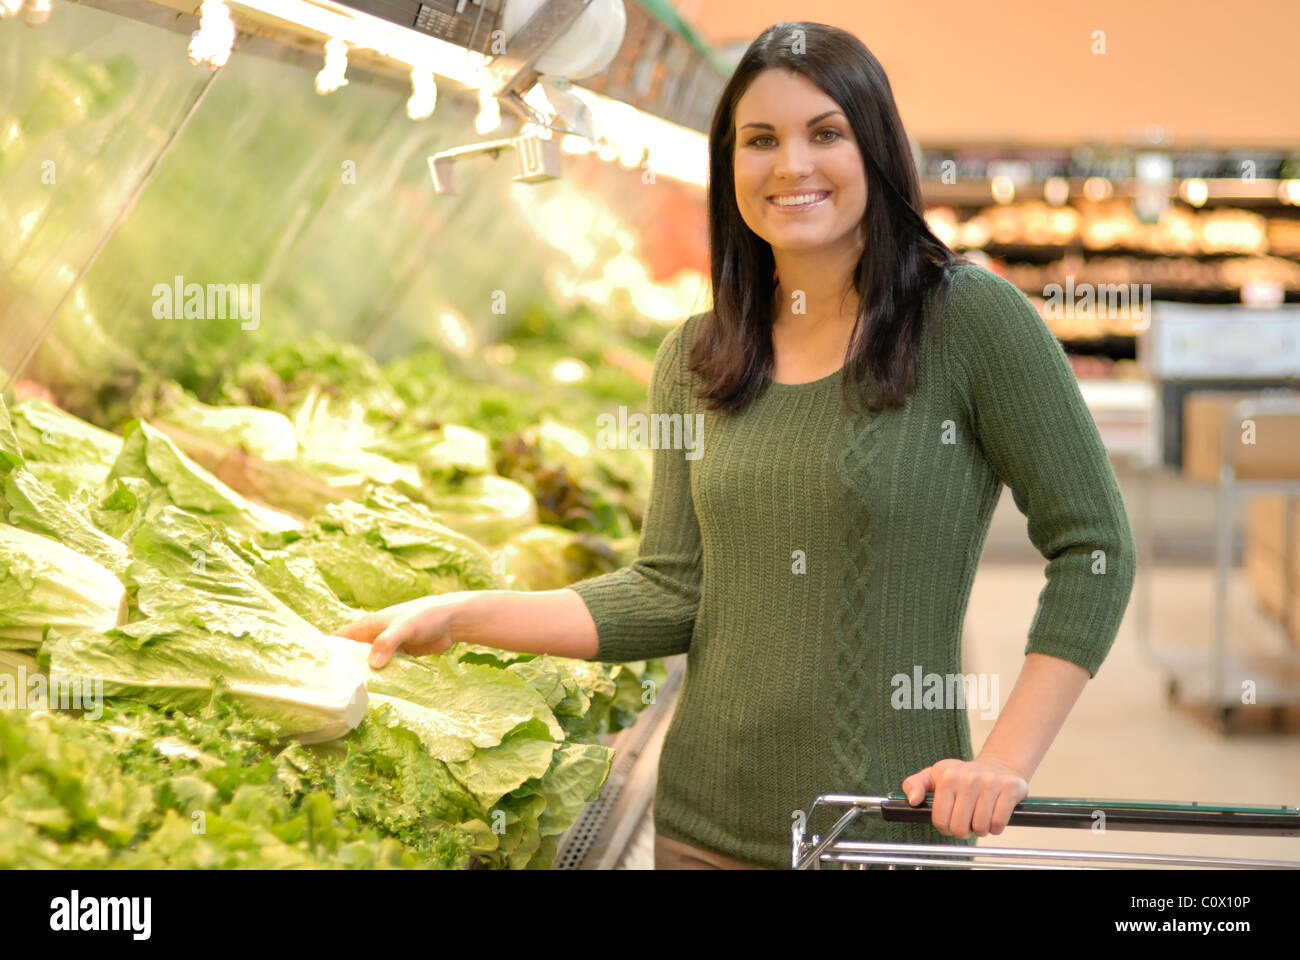 Stock Photography of Attractive Woman Shopping For Produce or Groceries Stock Photo